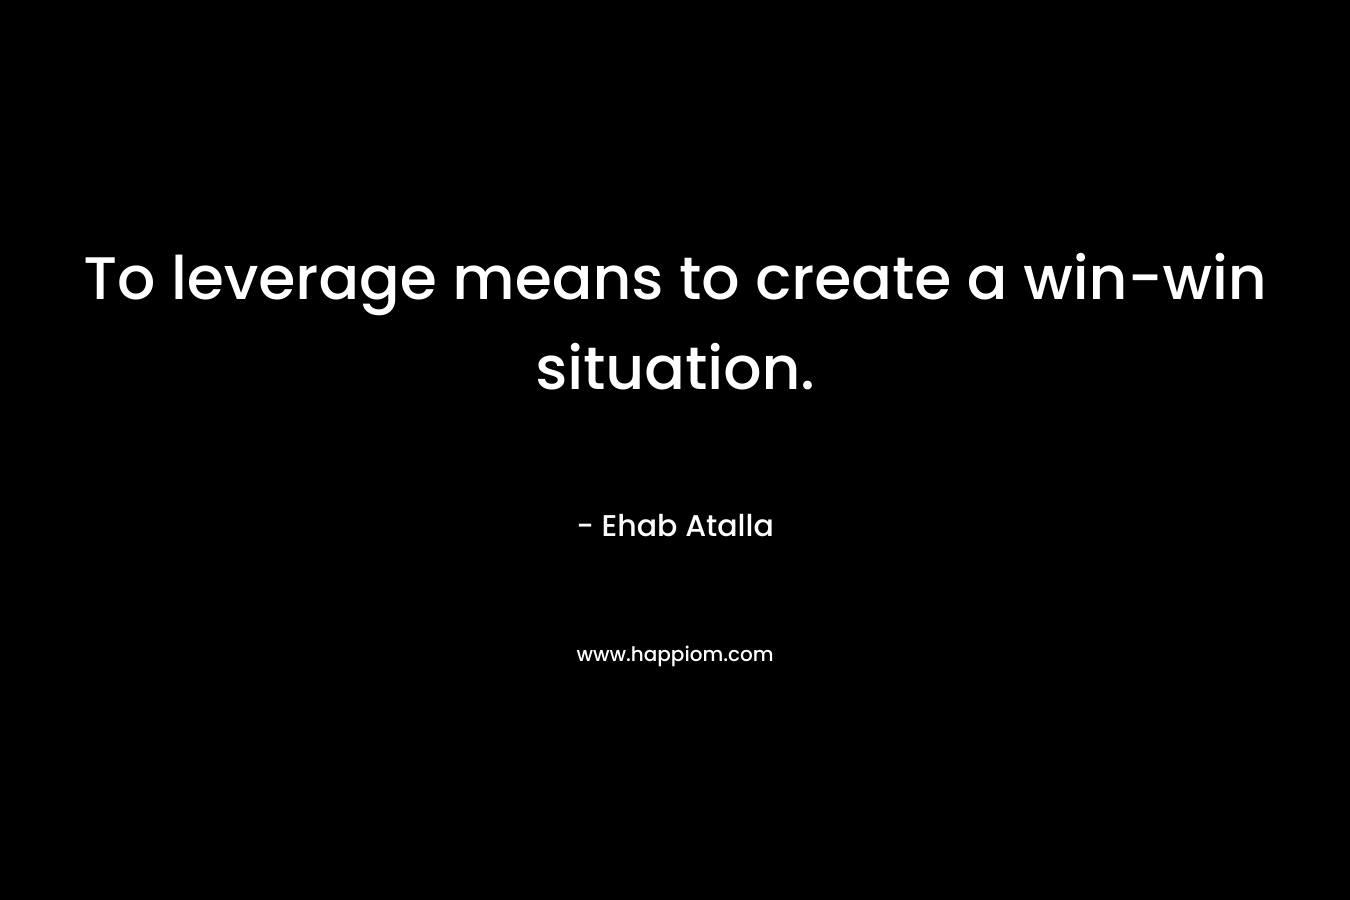 To leverage means to create a win-win situation.